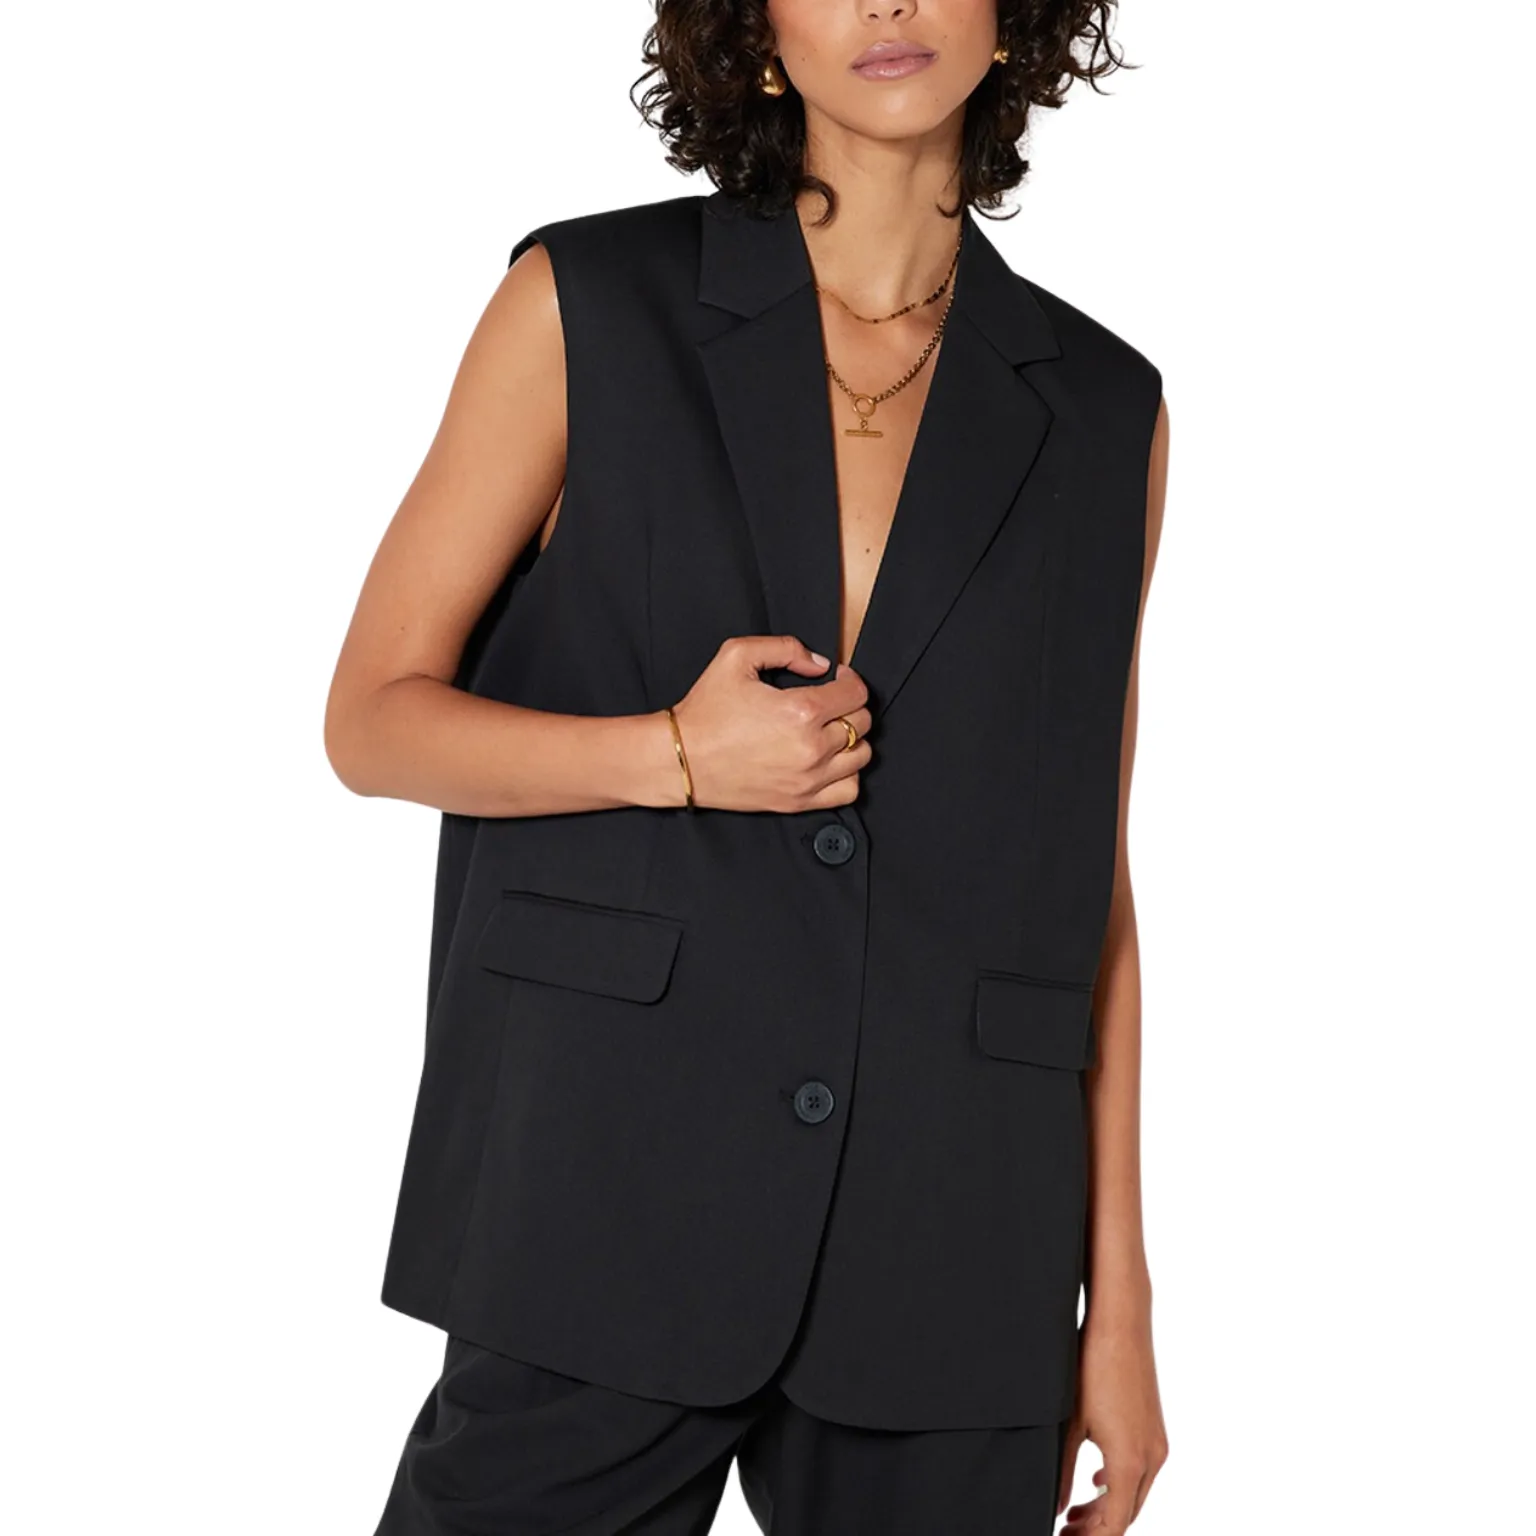 Sleeveless Blazer Manufacturing with superior quality